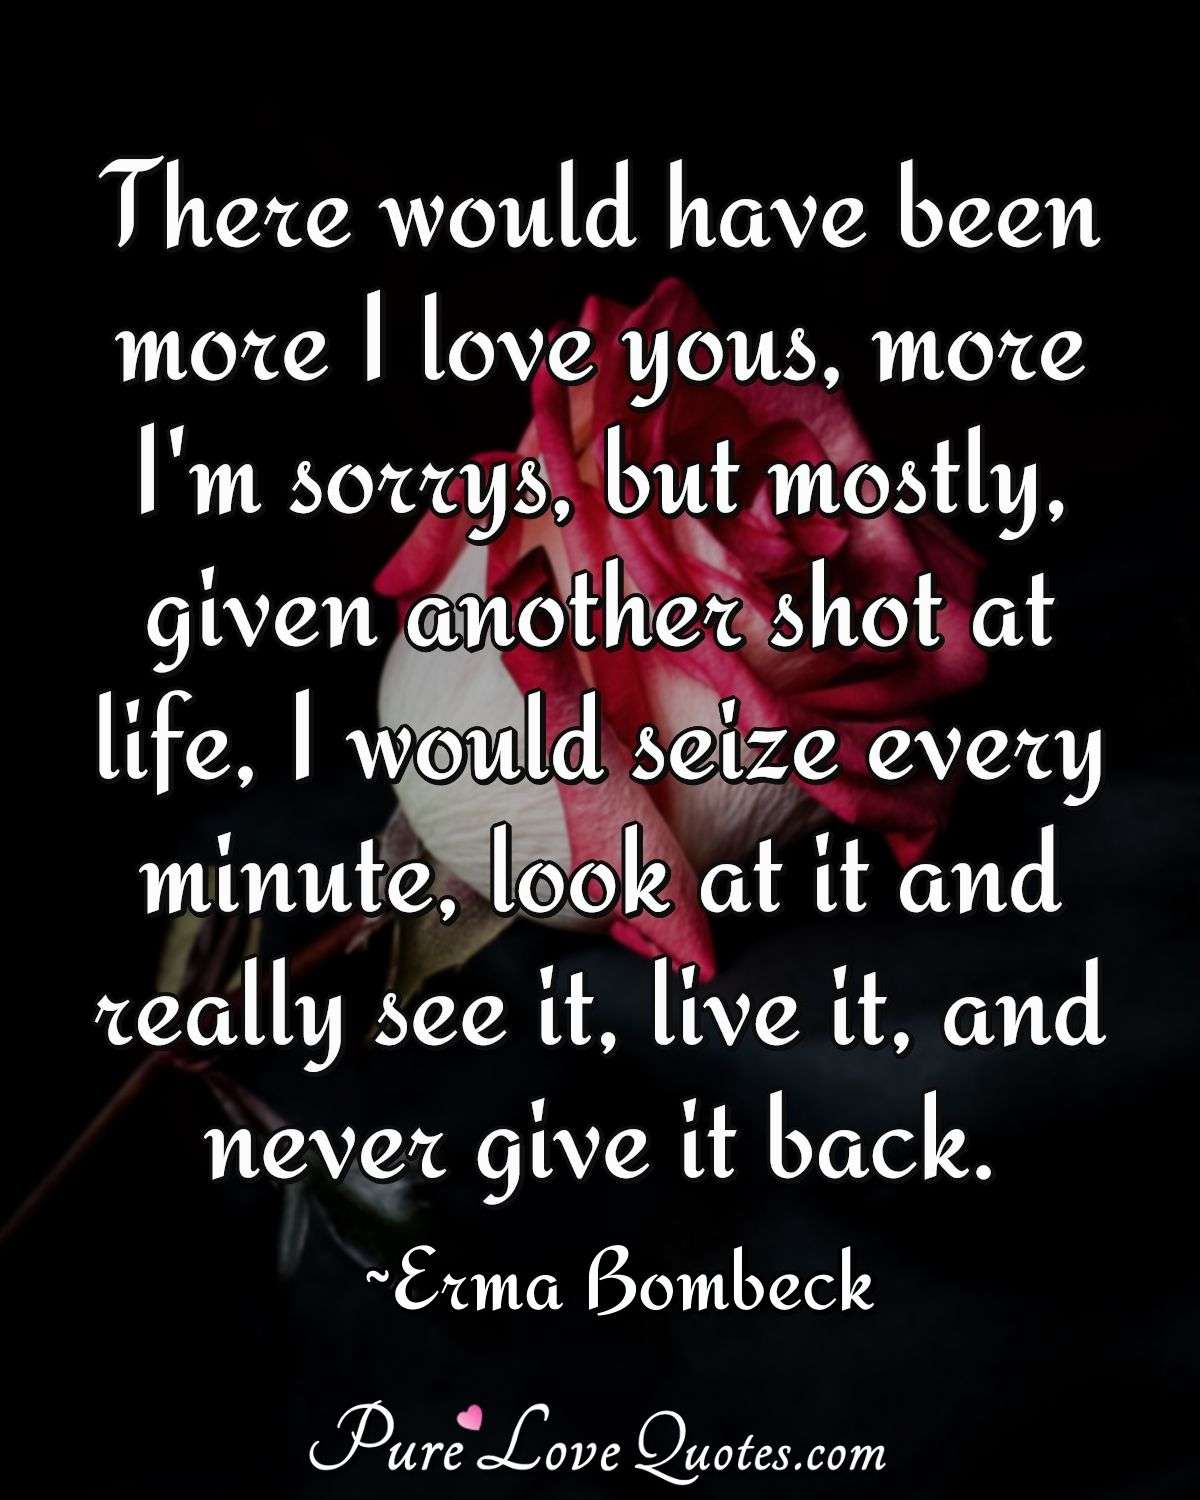 There would have been more I love yous, more I'm sorrys, but mostly, given another shot at life, I would seize every minute, look at it and really see it, live it, and never give it back. - Erma Bombeck